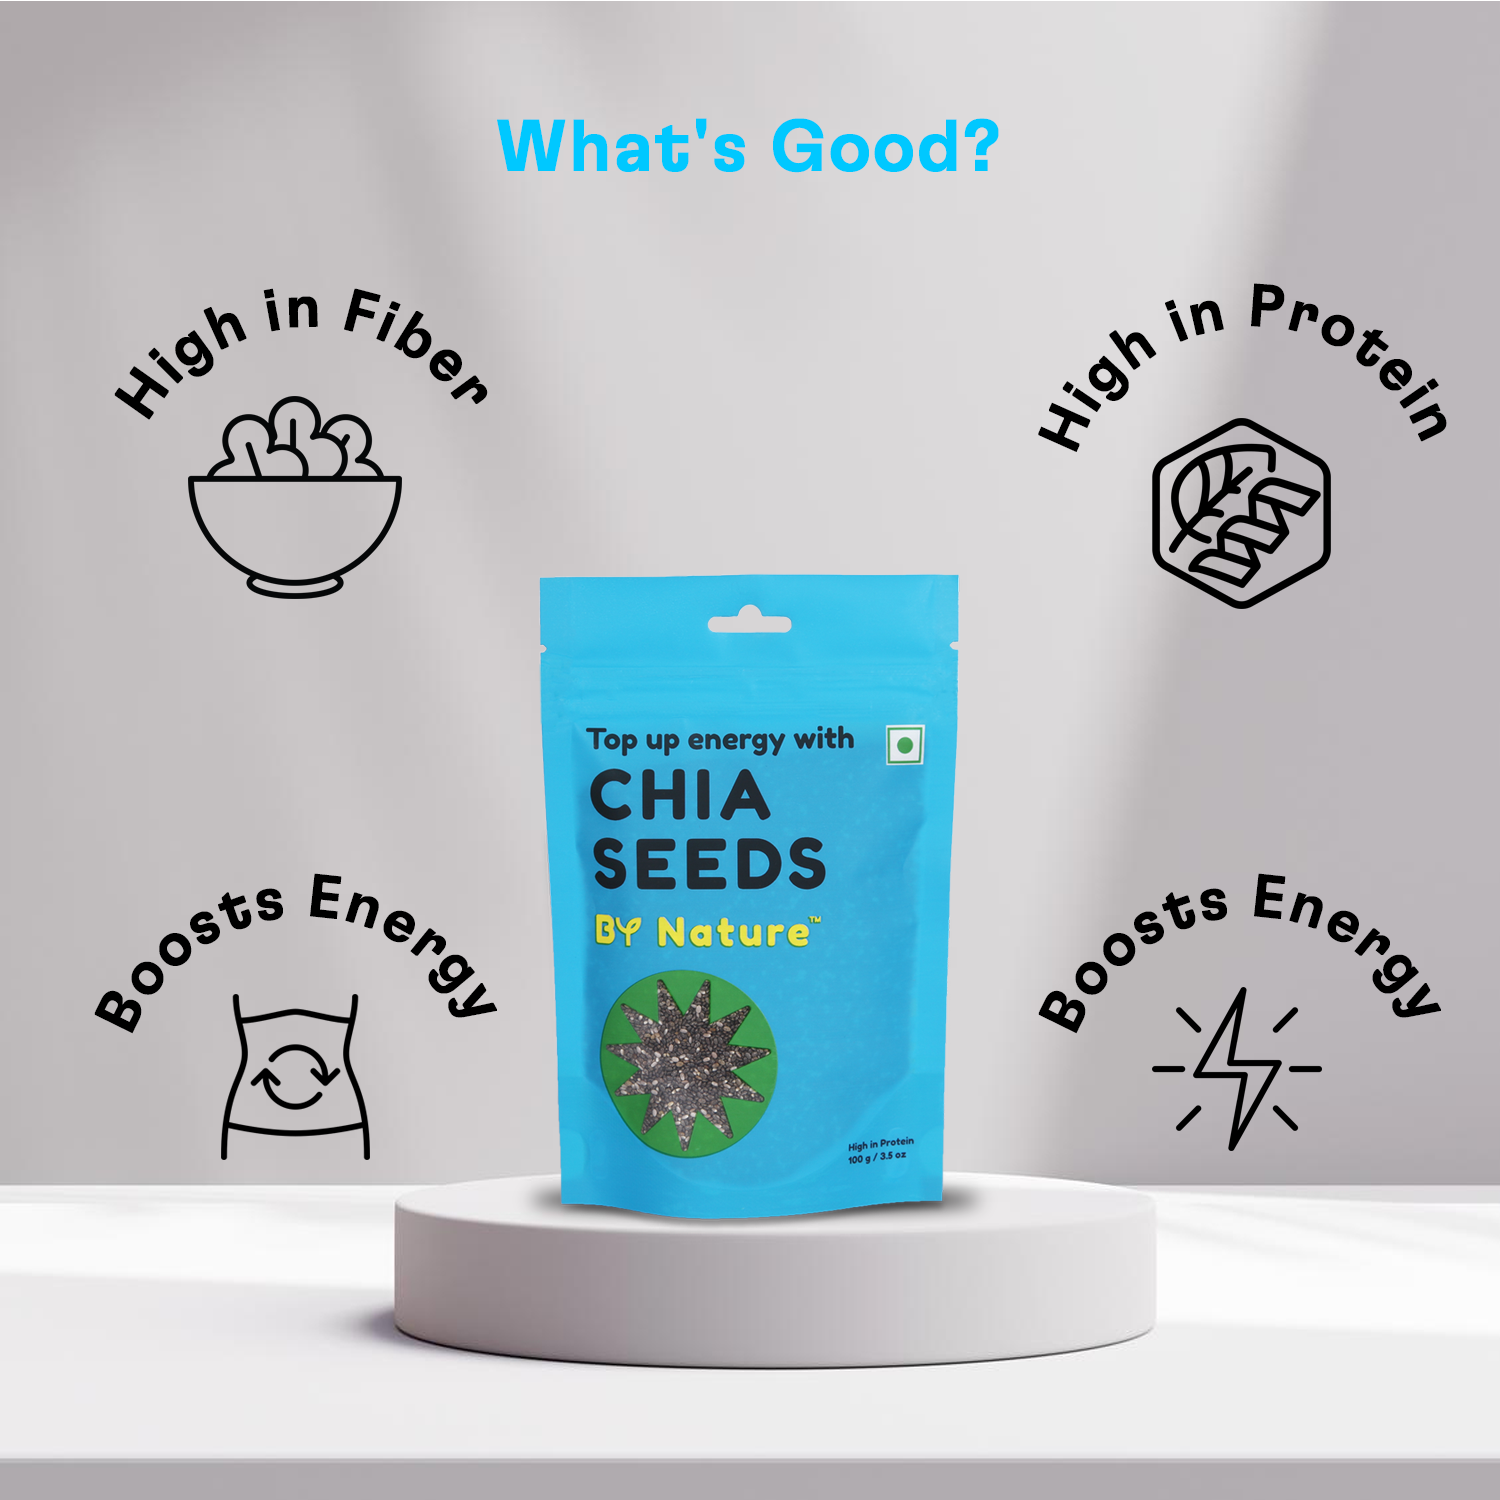 By Nature Premium Chia Seeds, 250g